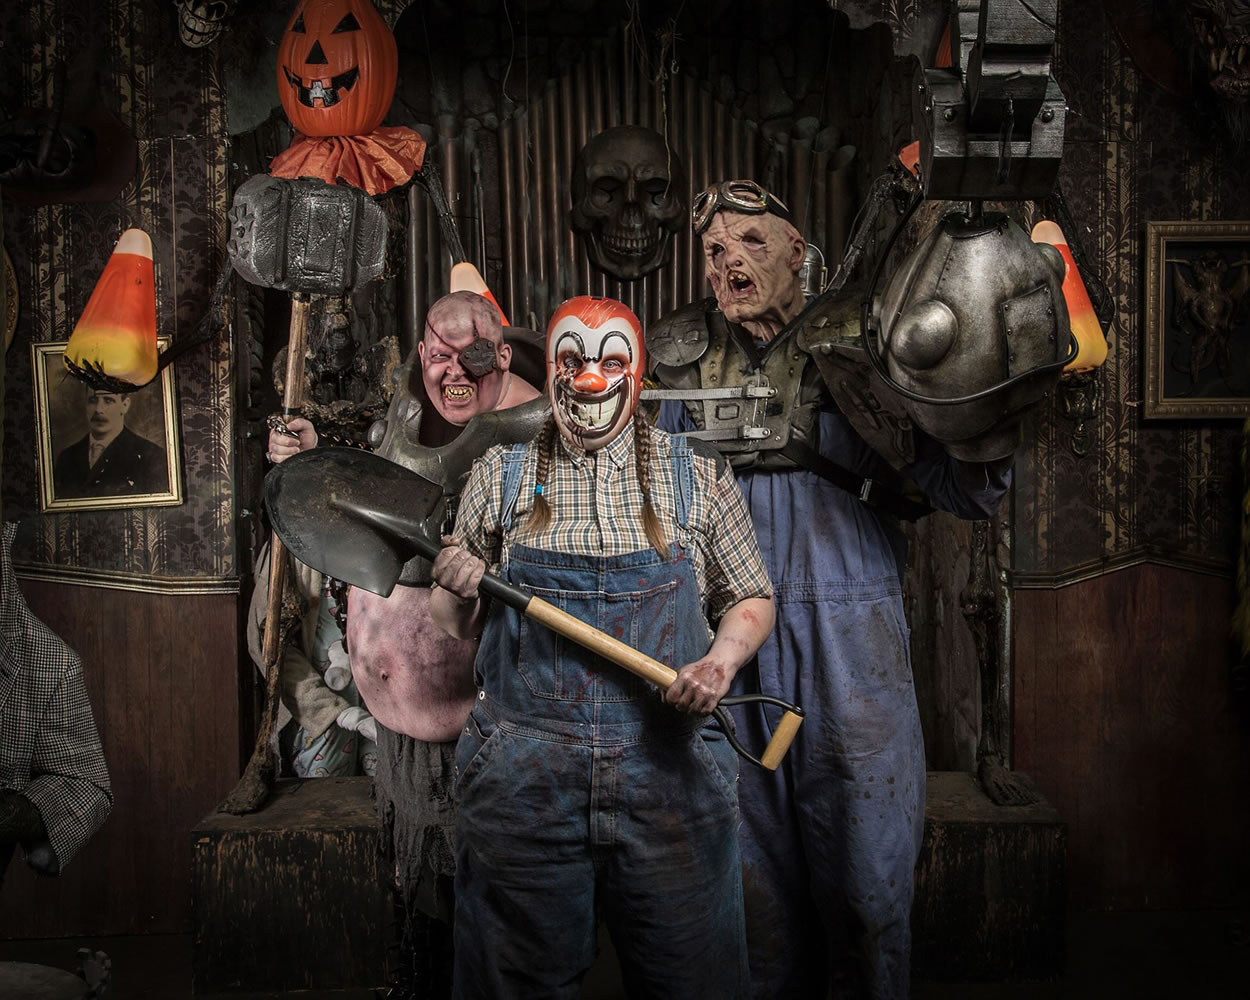 FrightTown features three themed haunted houses open for 22 nights of terror Oct. 3 through Nov.